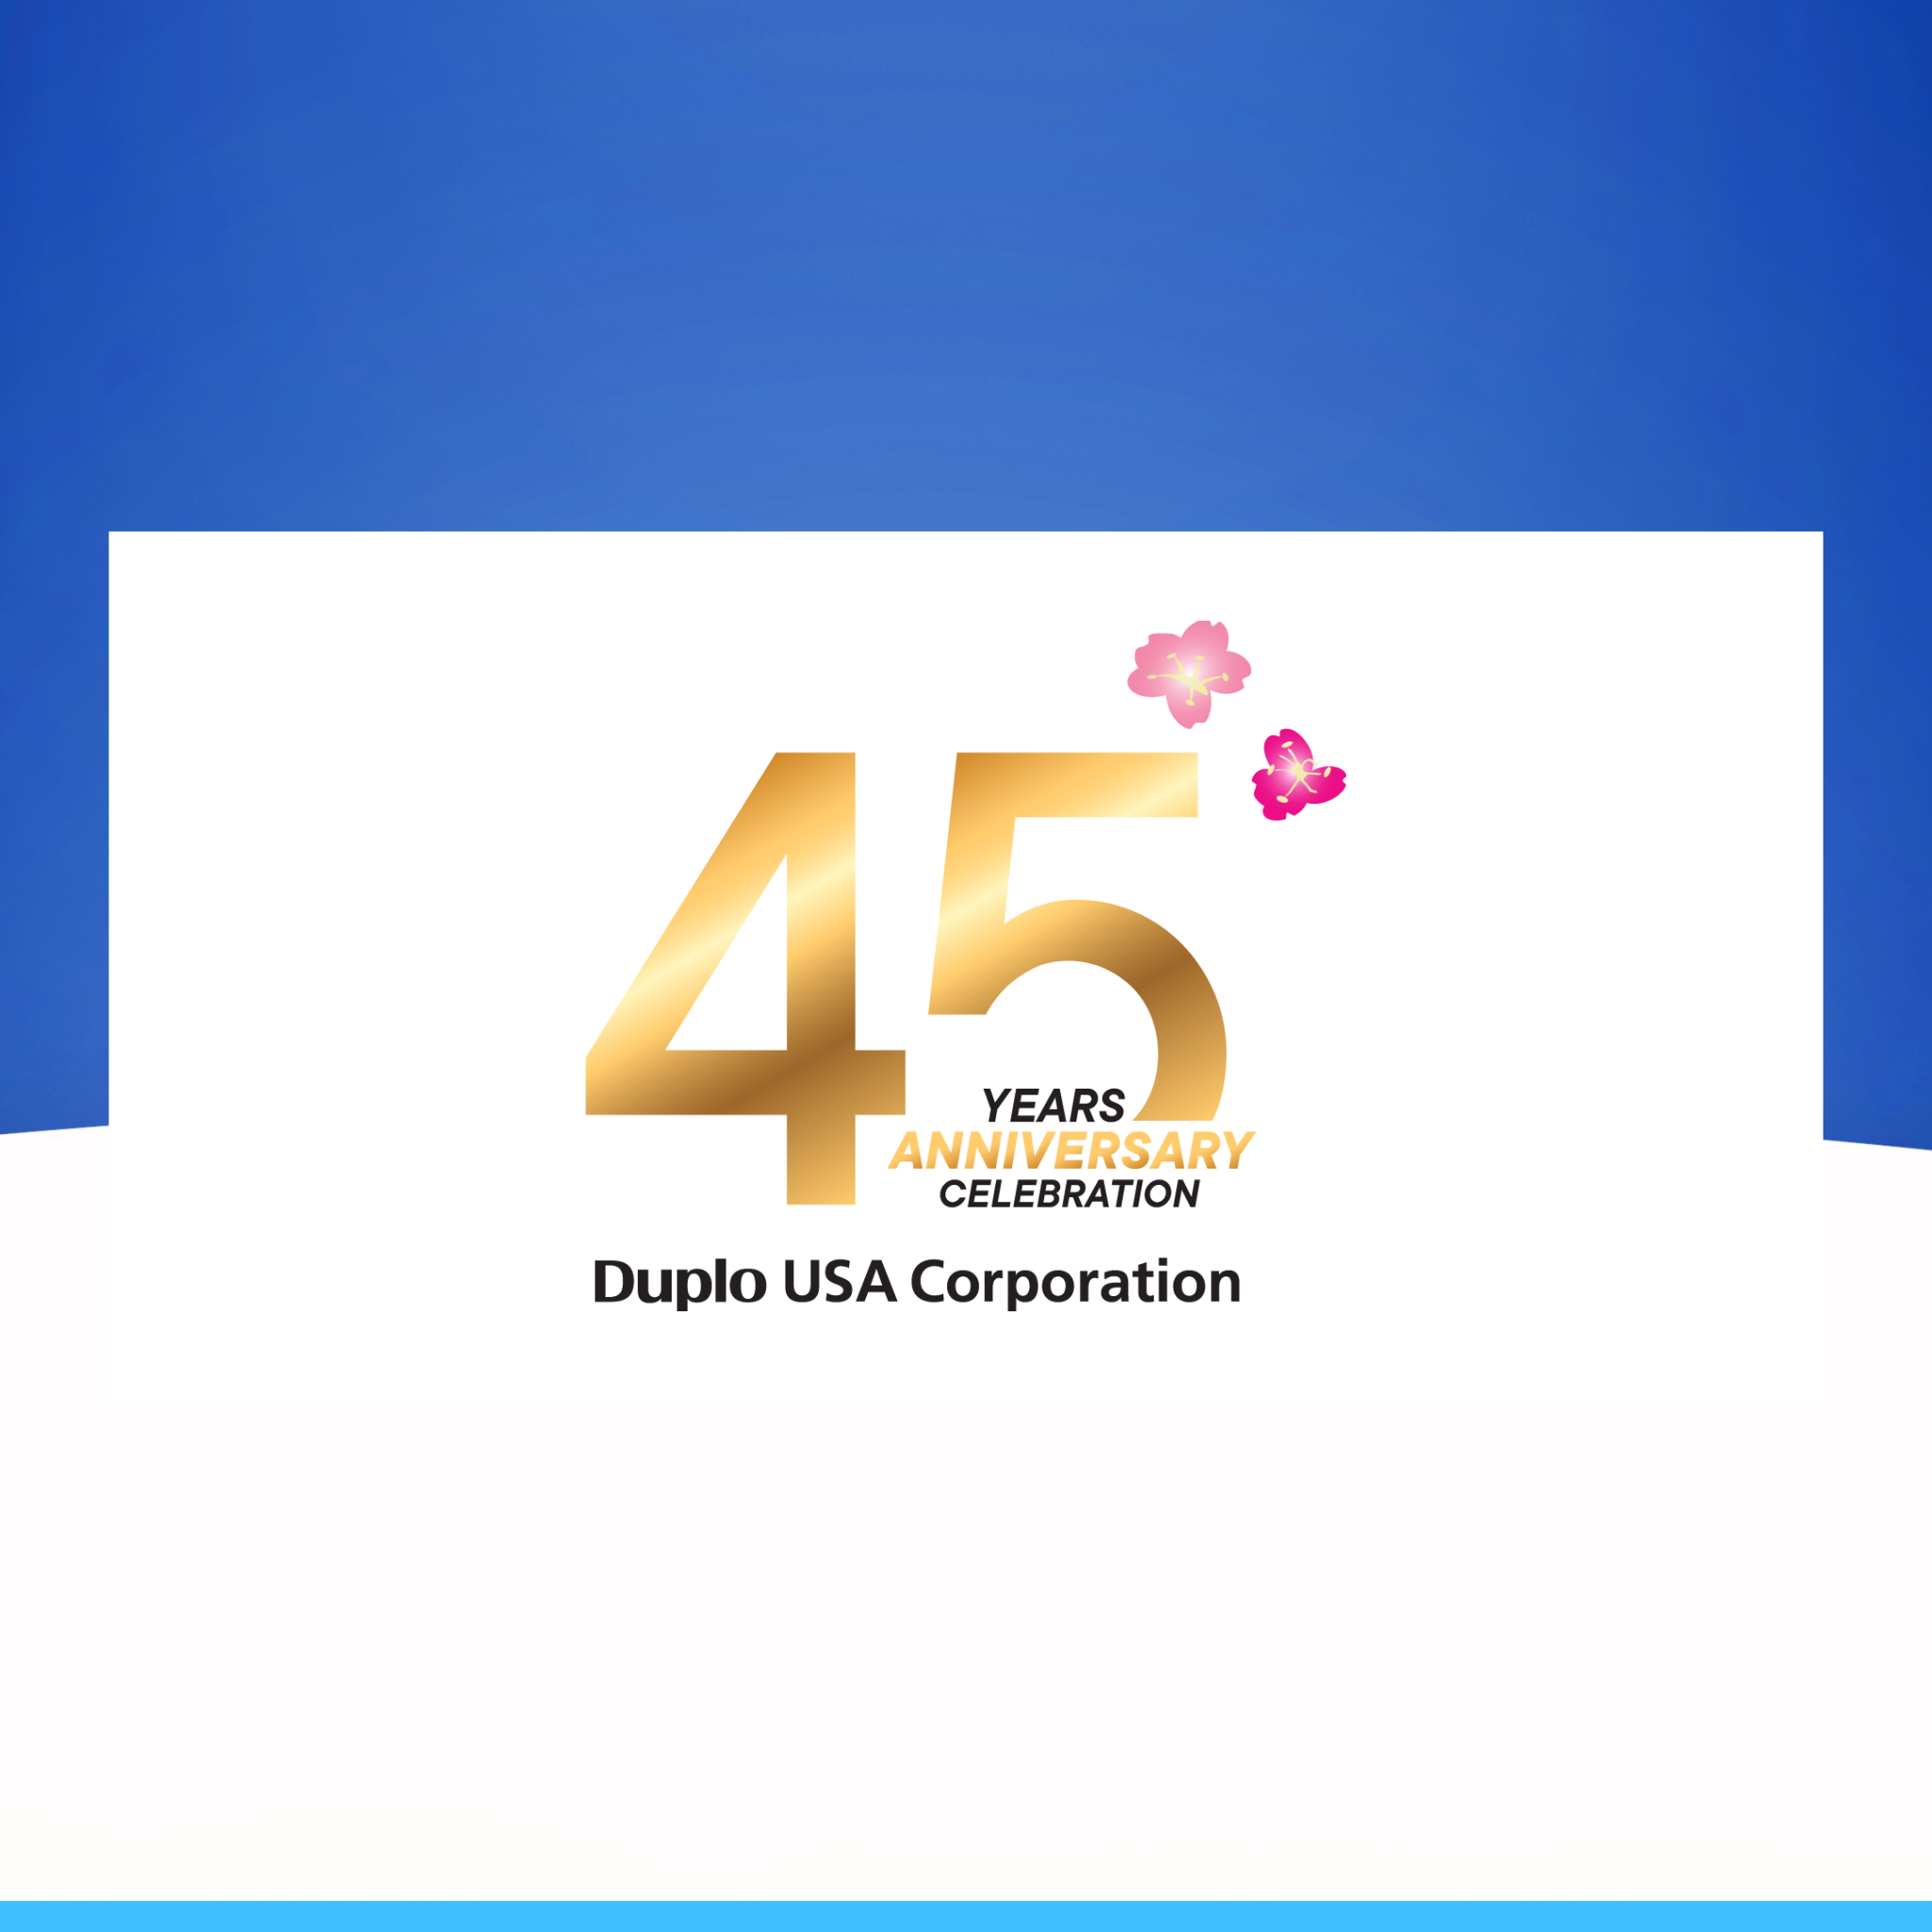 Duplo USA Celebrates 45 Years as the Leading Provider in Digital Print Finishing